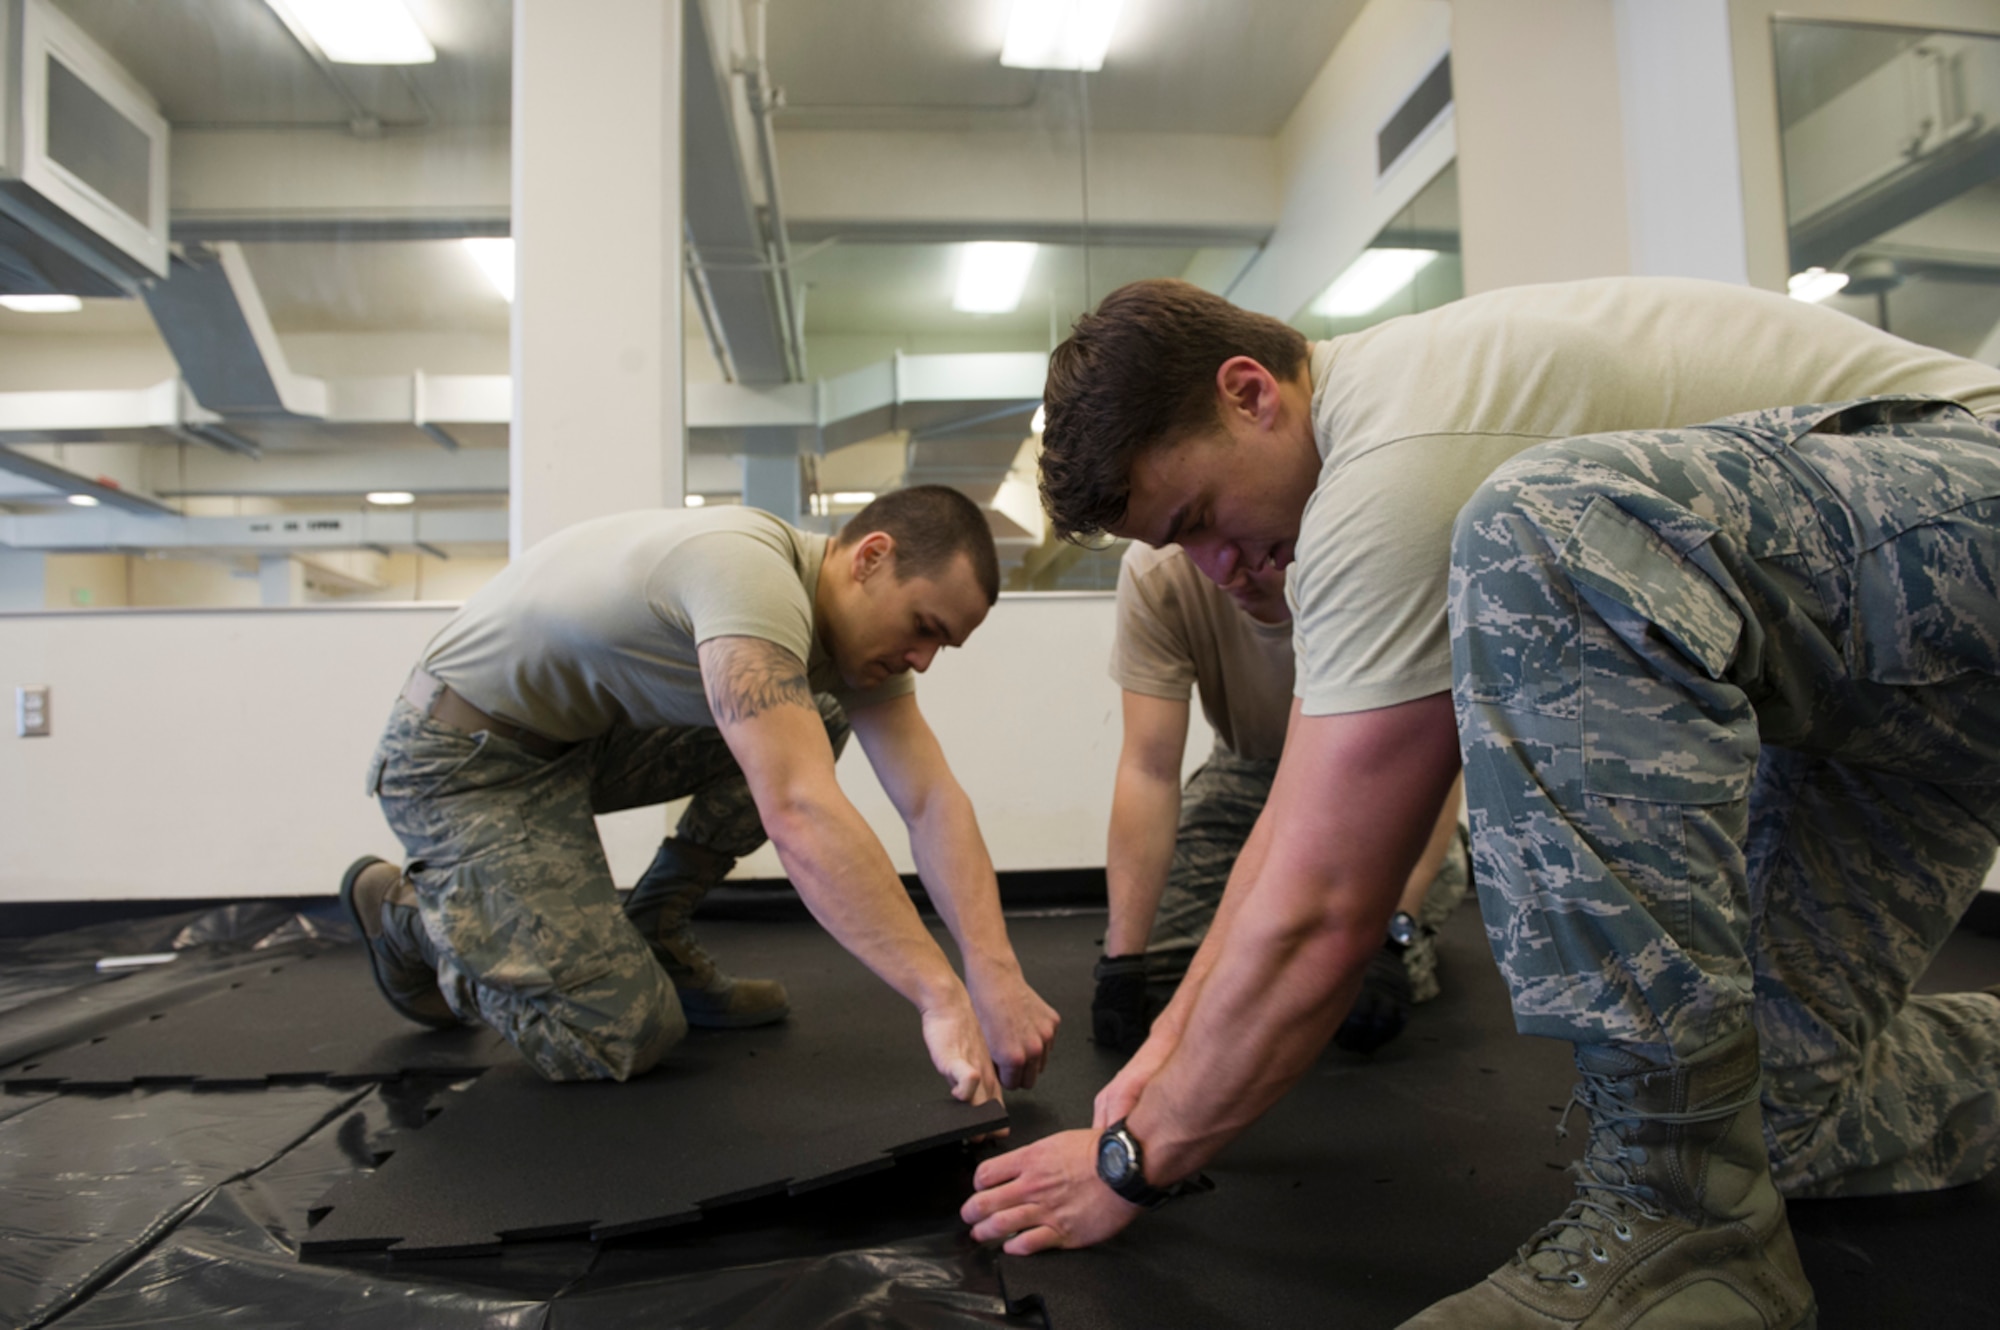 Airman 1st Class Cody Brant, 673d Contracting Squadron, Senior Airman Jacob Revell, 517th Air Support Squadron, and Senior Airman Tyler Denslow, 3rd Munitions Squadron, lay down mats in the aerobics room of the Elmendorf Fitness Center on Joint Base Elmendorf Richardson, Alaska, March 17, 2014.  Due to the gym being used as lodging, the fitness center will have reduced hours and the Hangar 5 field house will be closed. (U.S. Air Force photo/Airman 1st Class Omari Bernard)